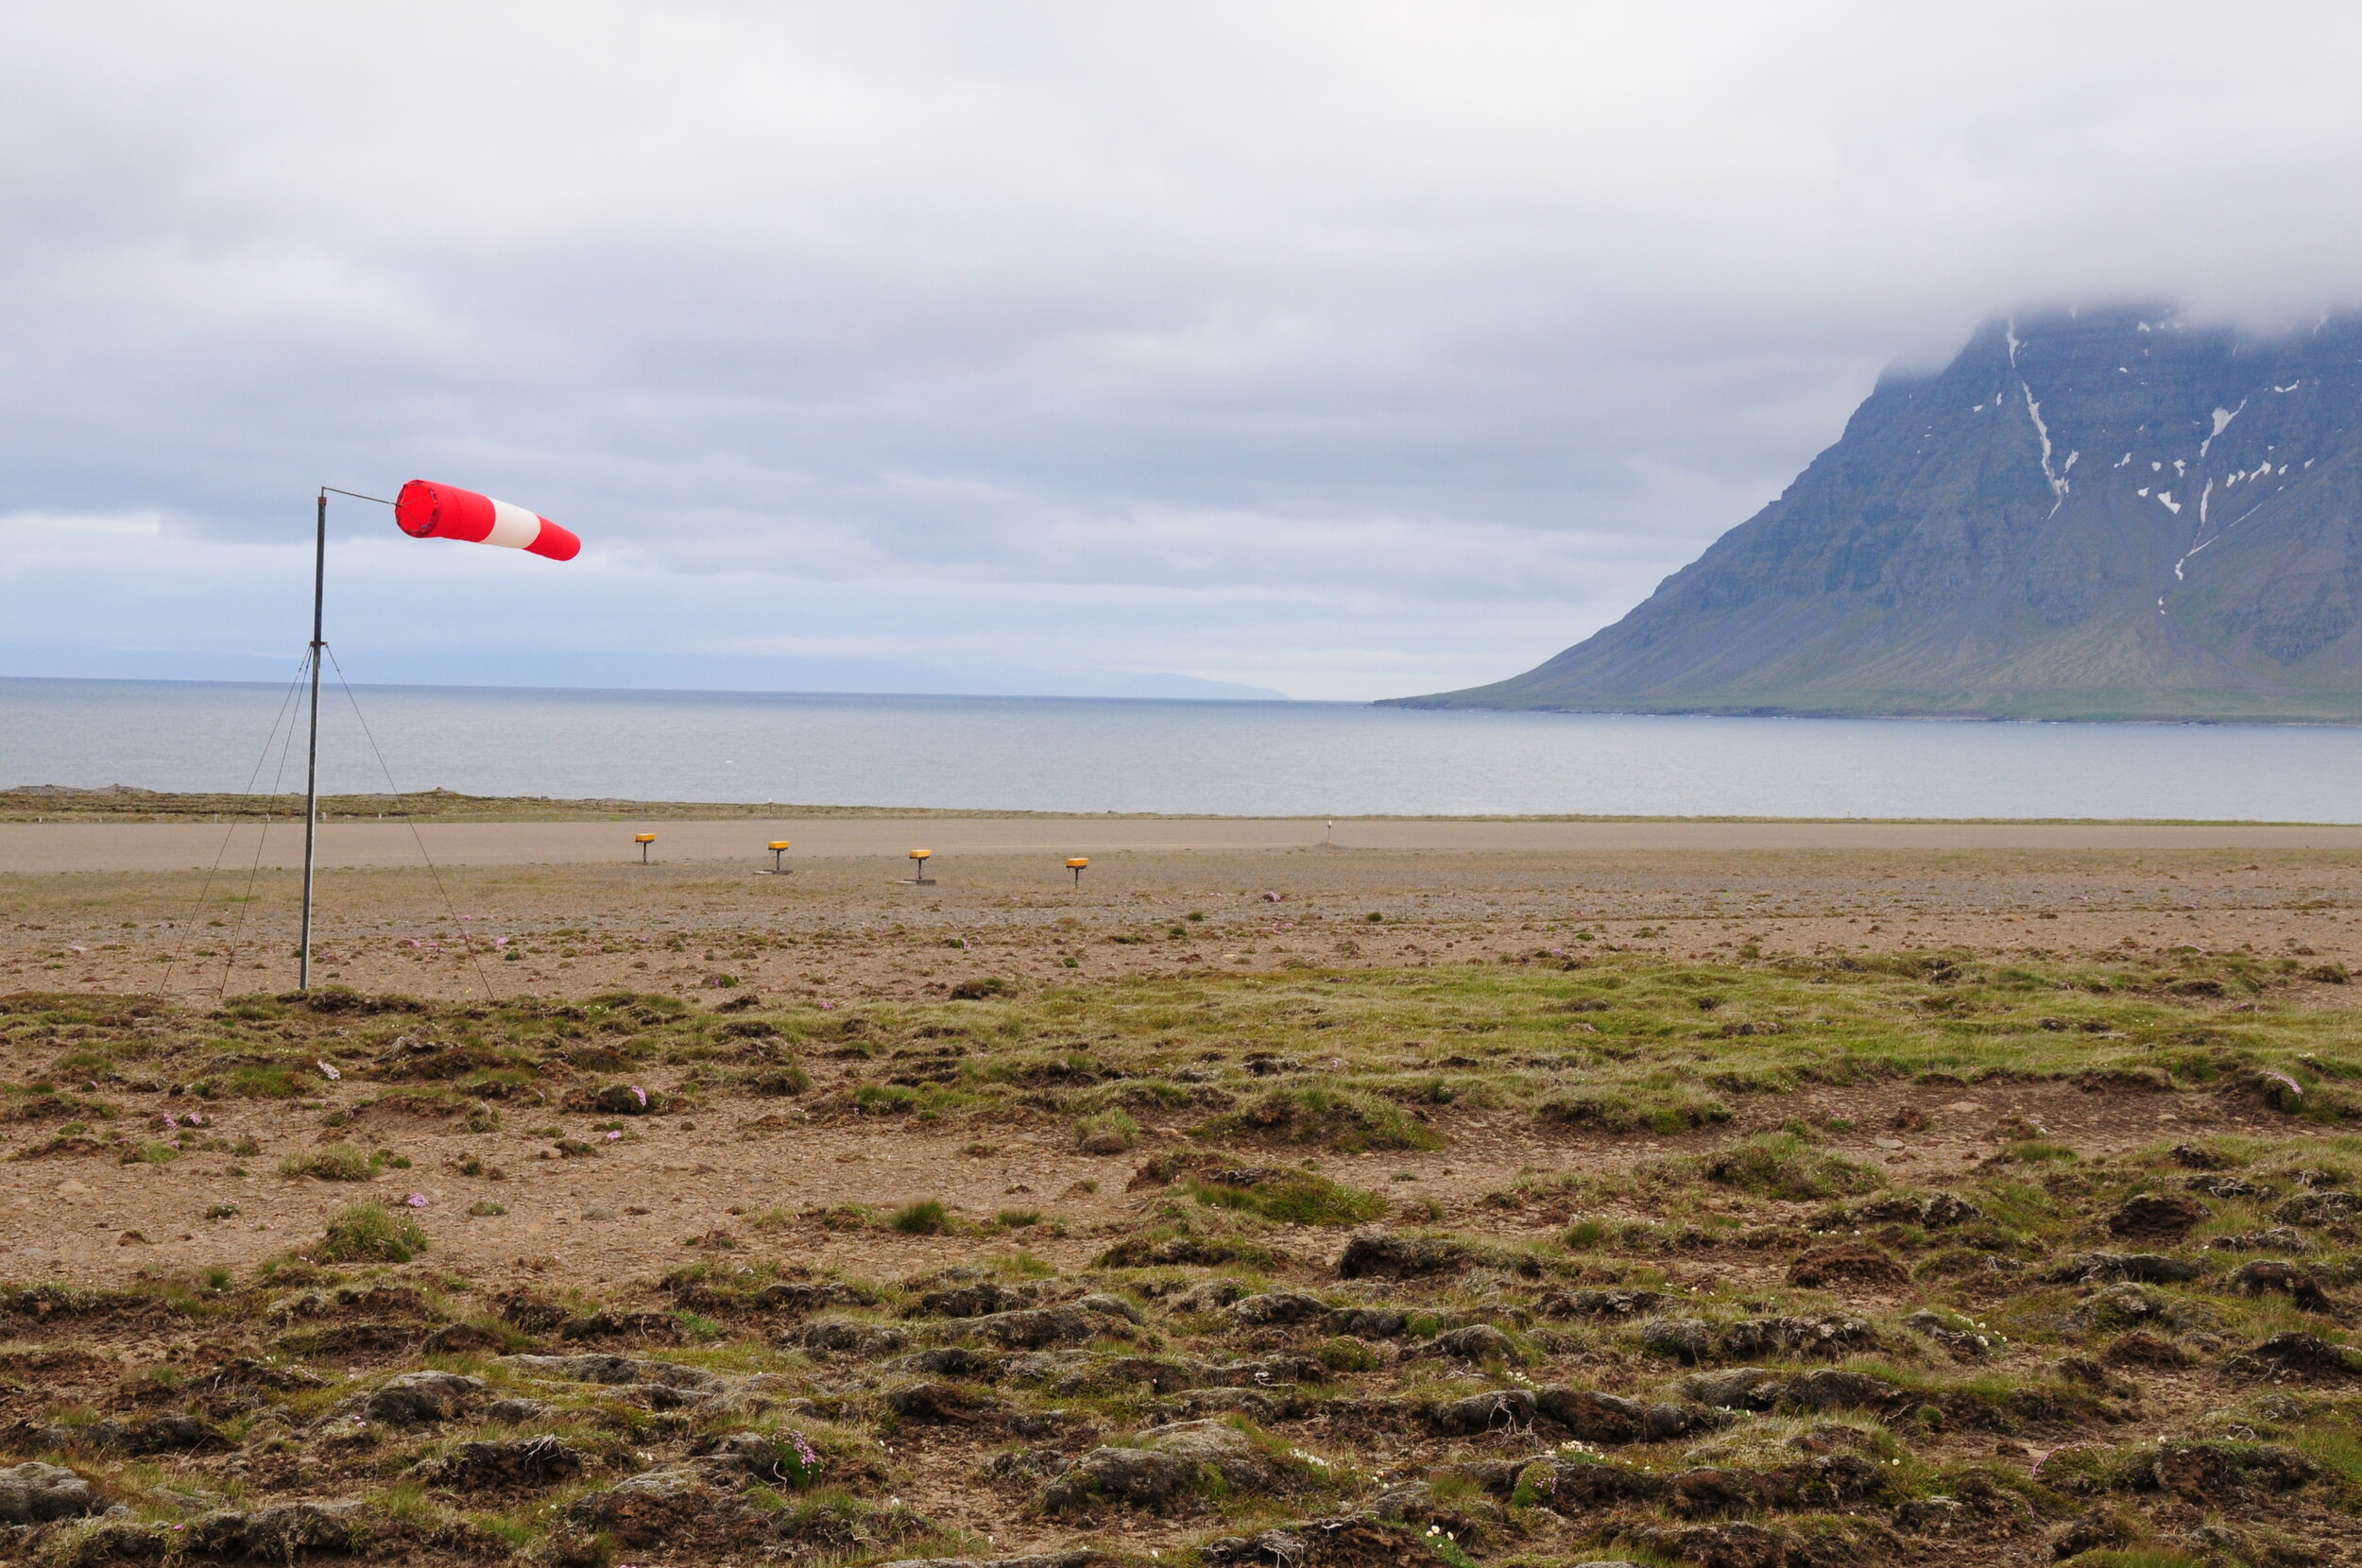  This series is an ongoing project documenting small airports in the countryside of Iceland.  